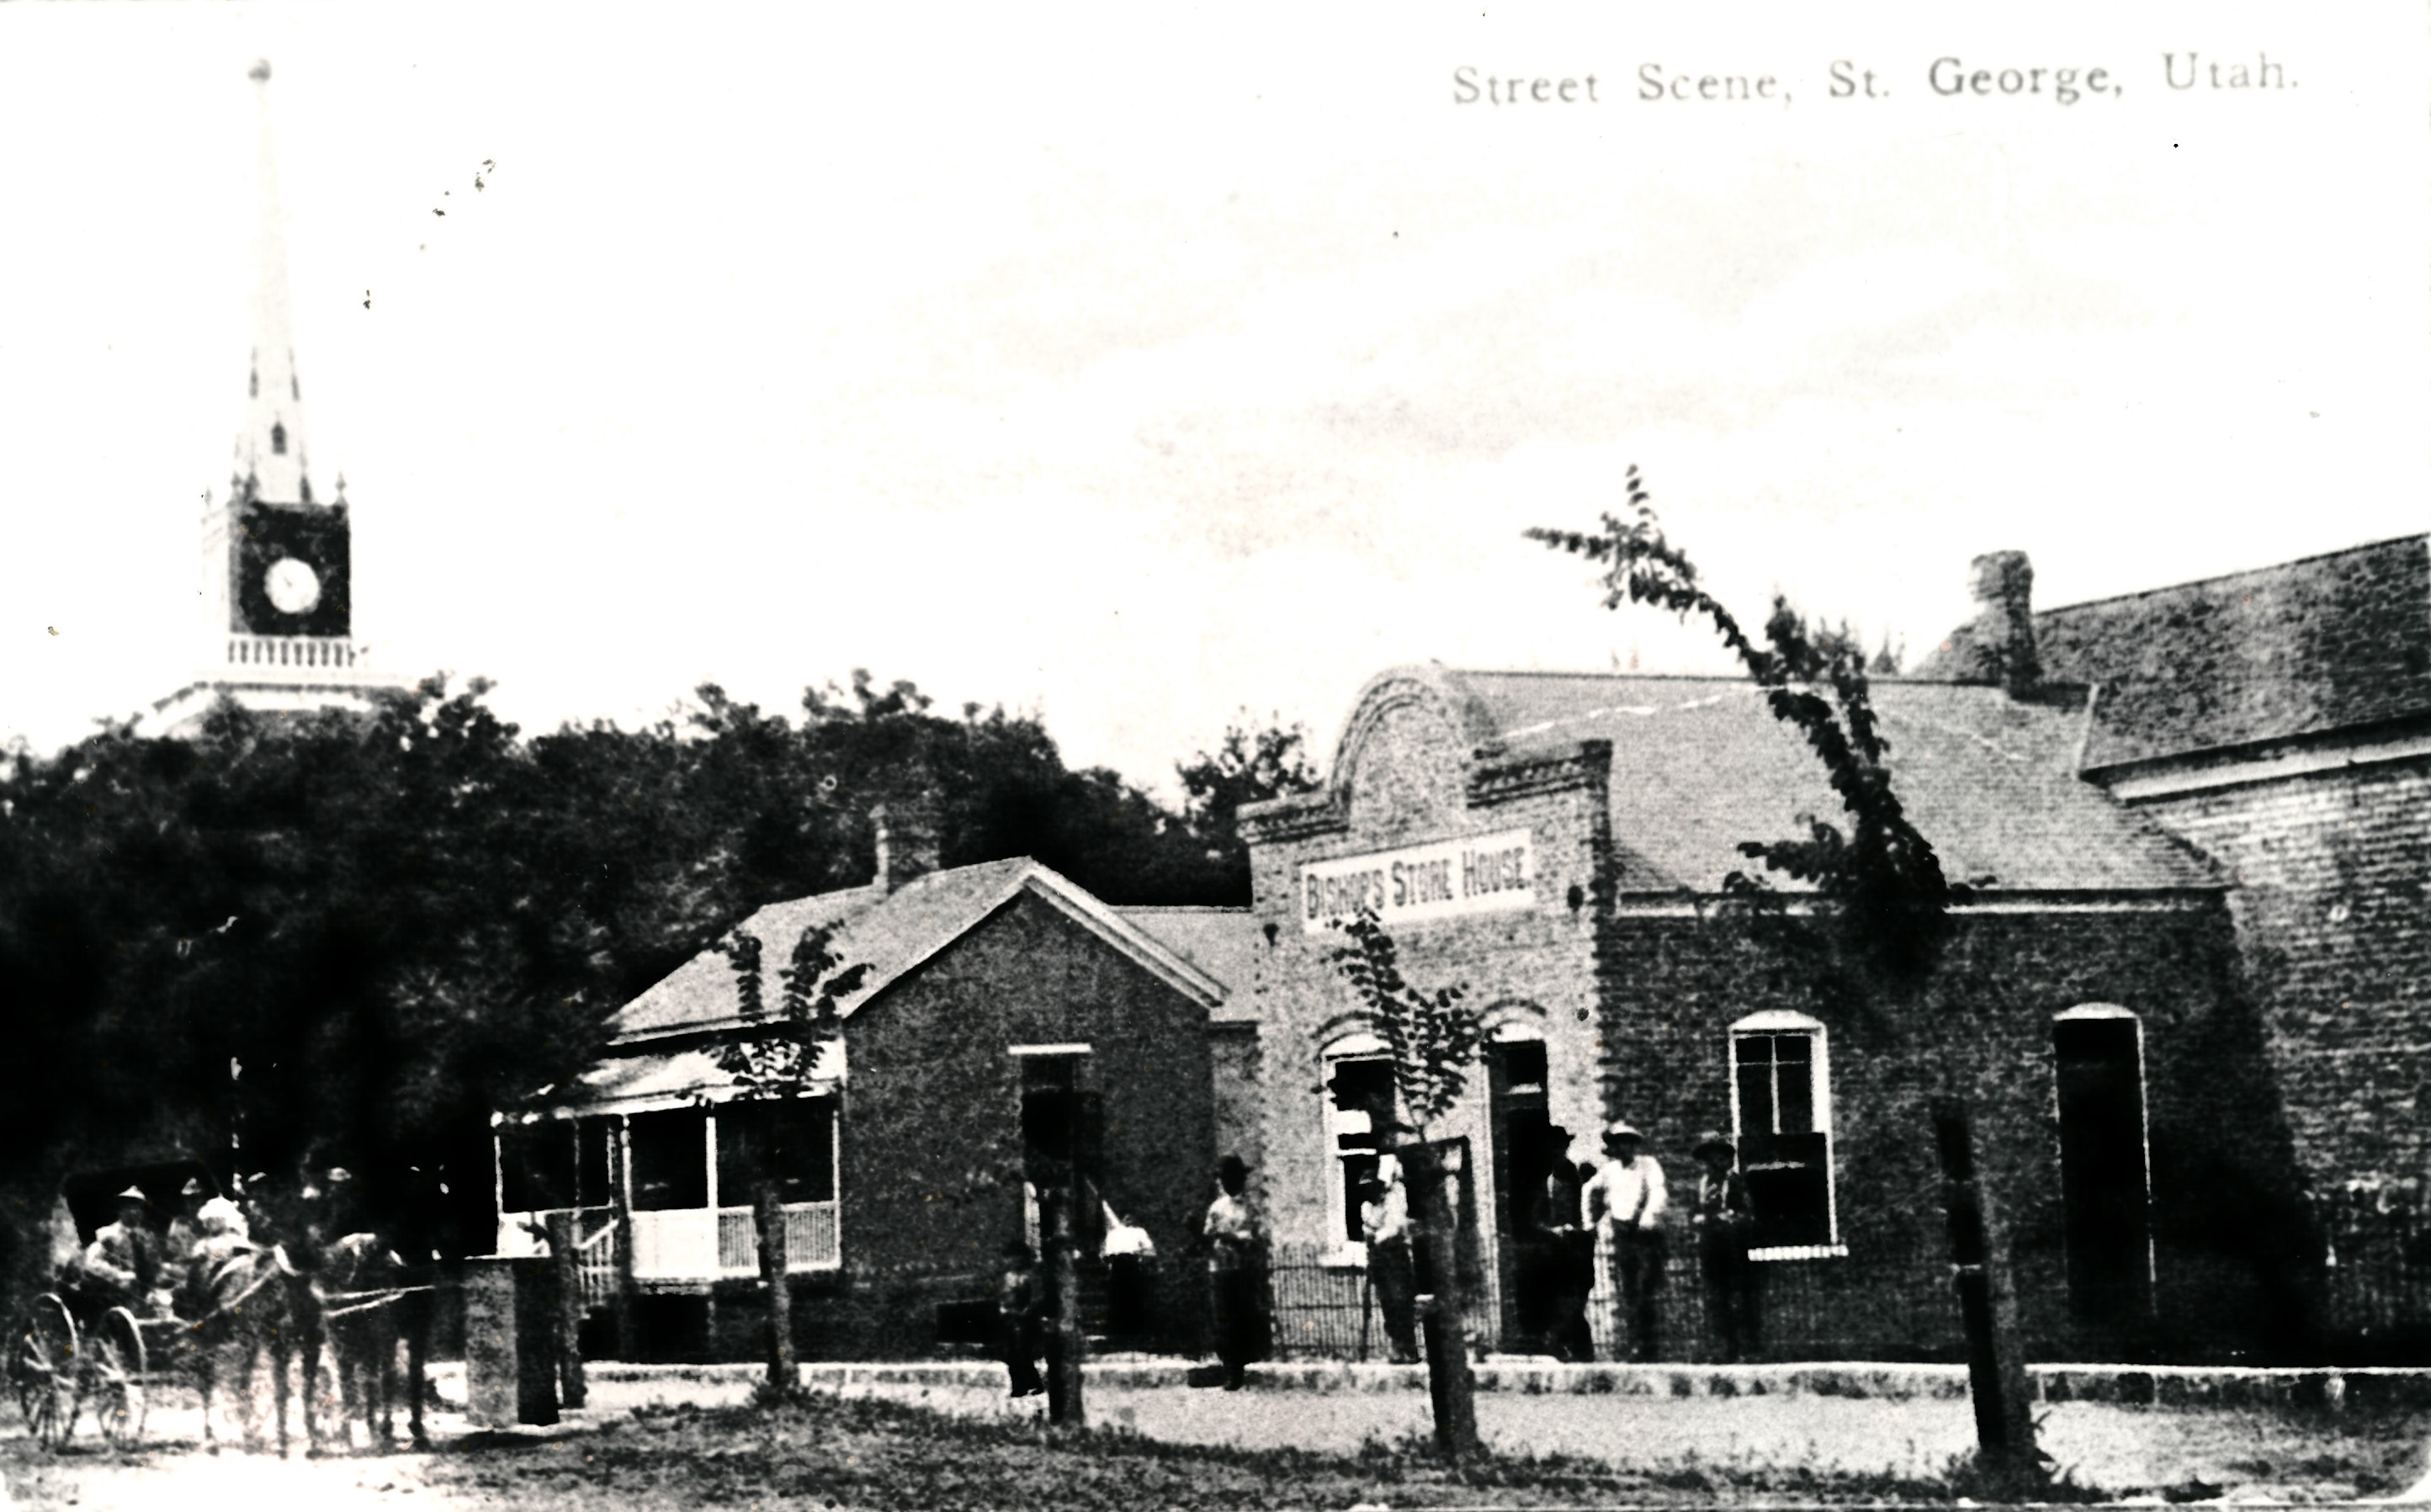 The Bishops' Store House in early St. George